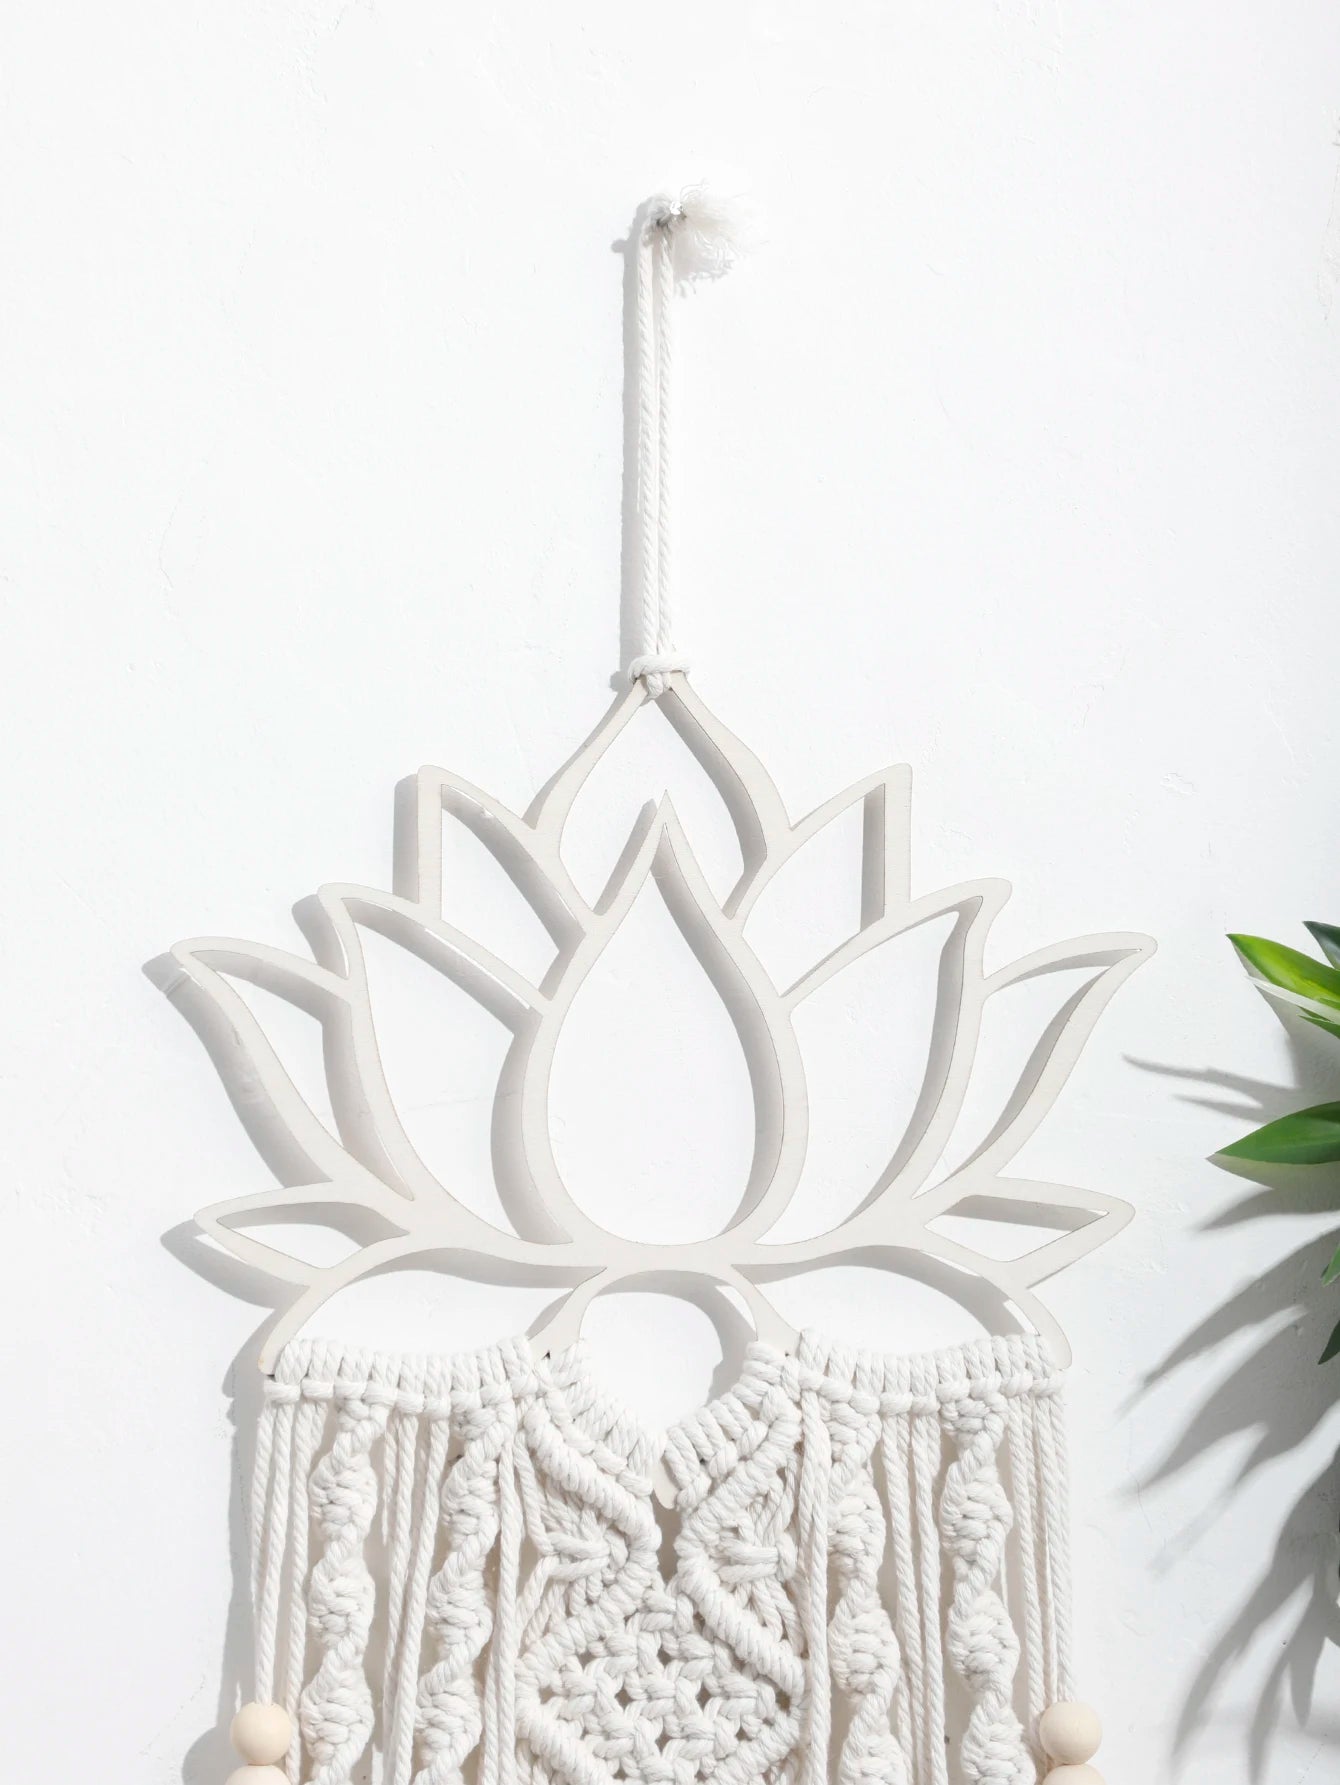 Lotus Macrame Wall Hanging Boho Macrame Dream Catcher Large Craft Ornament for Dorm Home Bedroom Apartment Room Decoration Gift